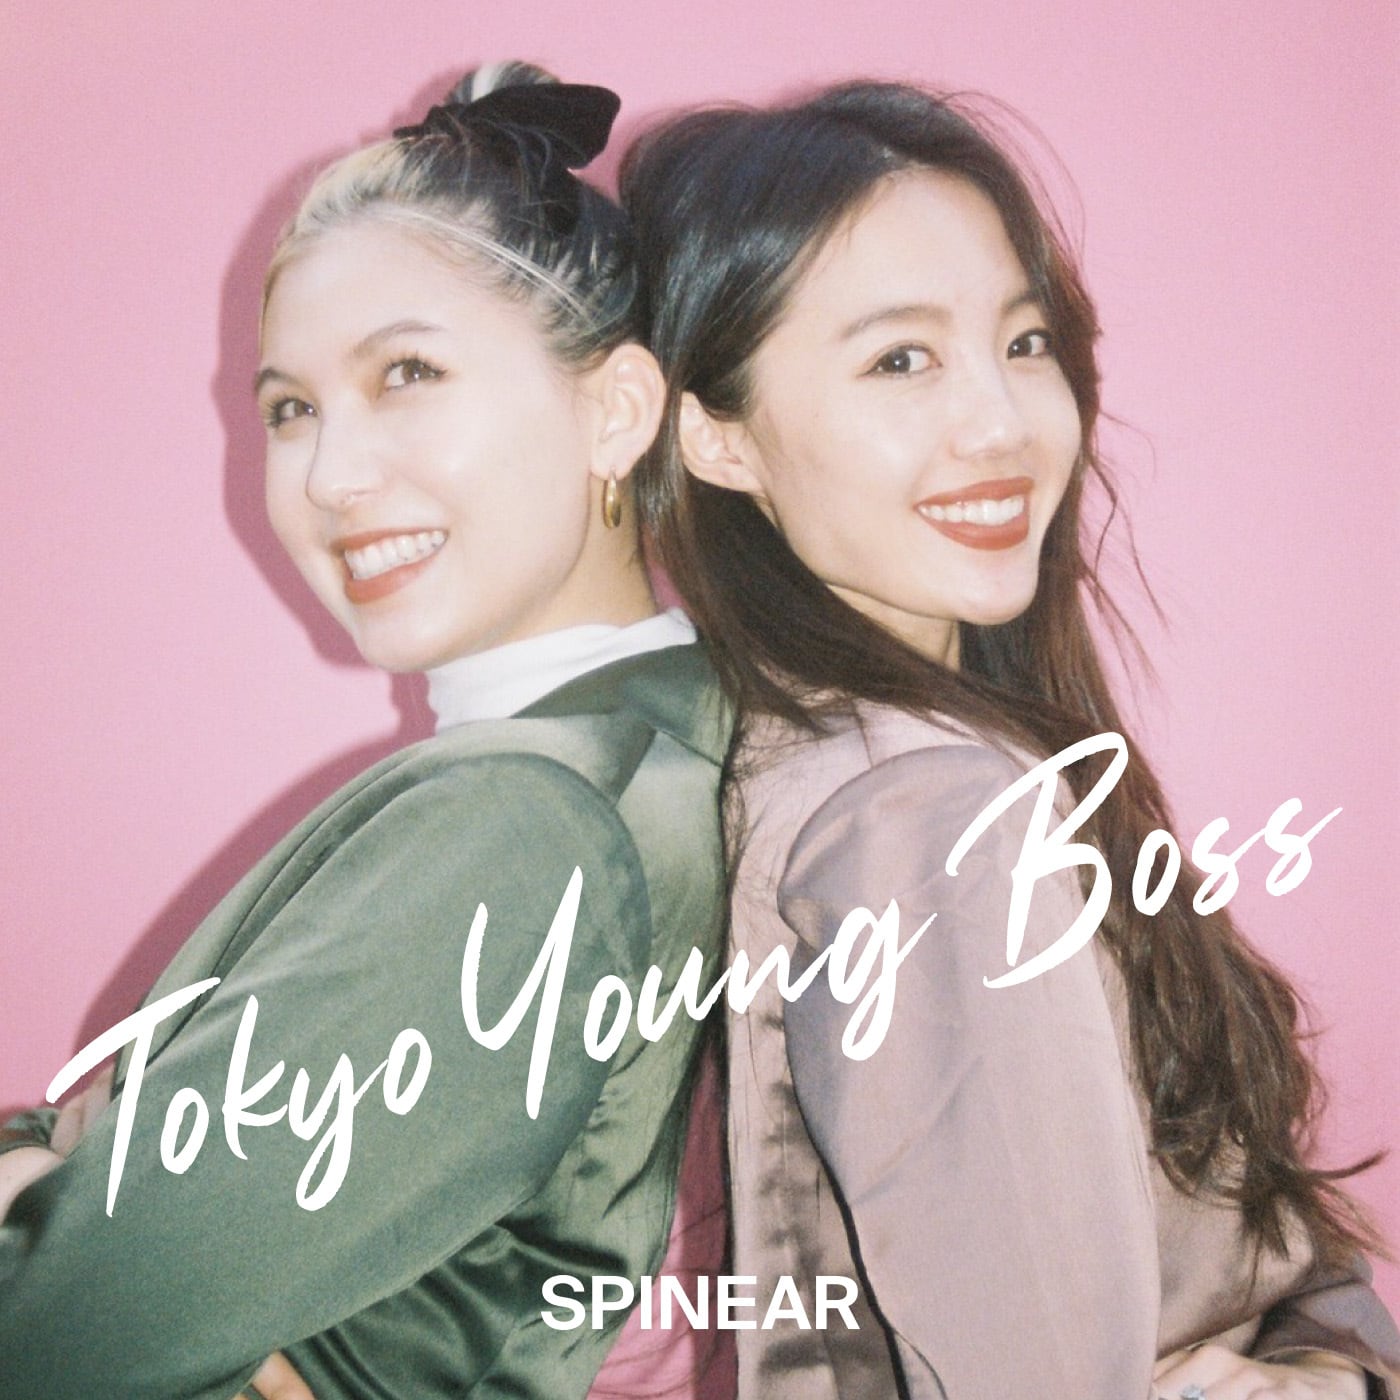 "Tokyo Young Boss" Official Shop